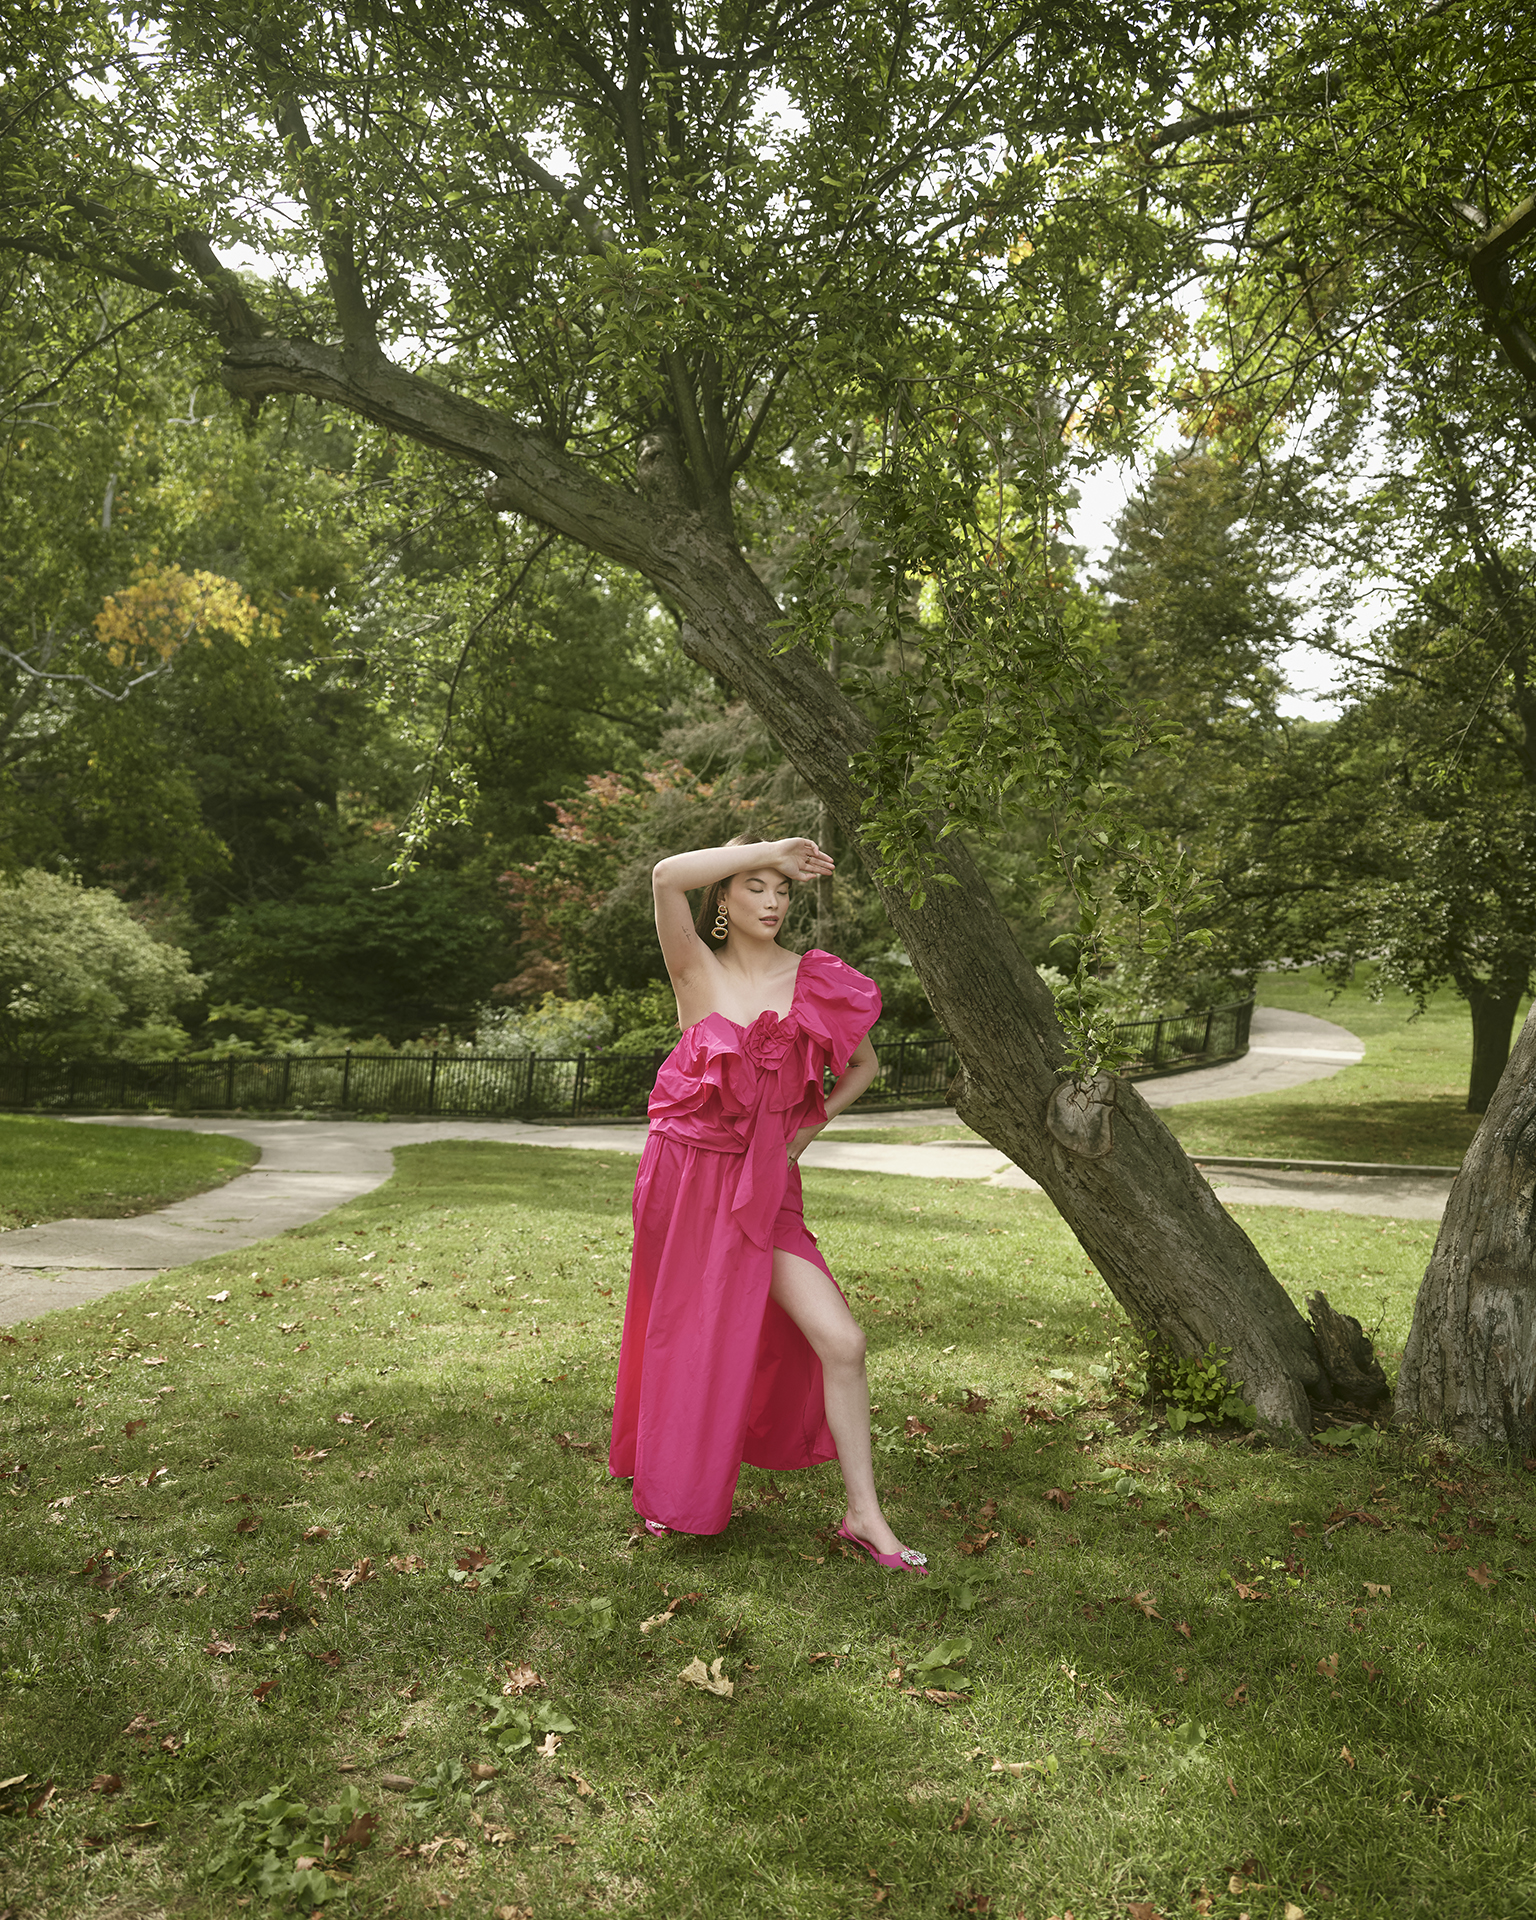 In this image, a female Asian subject is standing in the middle of the composition wearing a pink dress. She has one leg out of the dress’ slit and her right arm on her forehead. On her left side is a tree that grows diagonally across the image. Far behind her are three parkways and more greenery that take up most of the image.